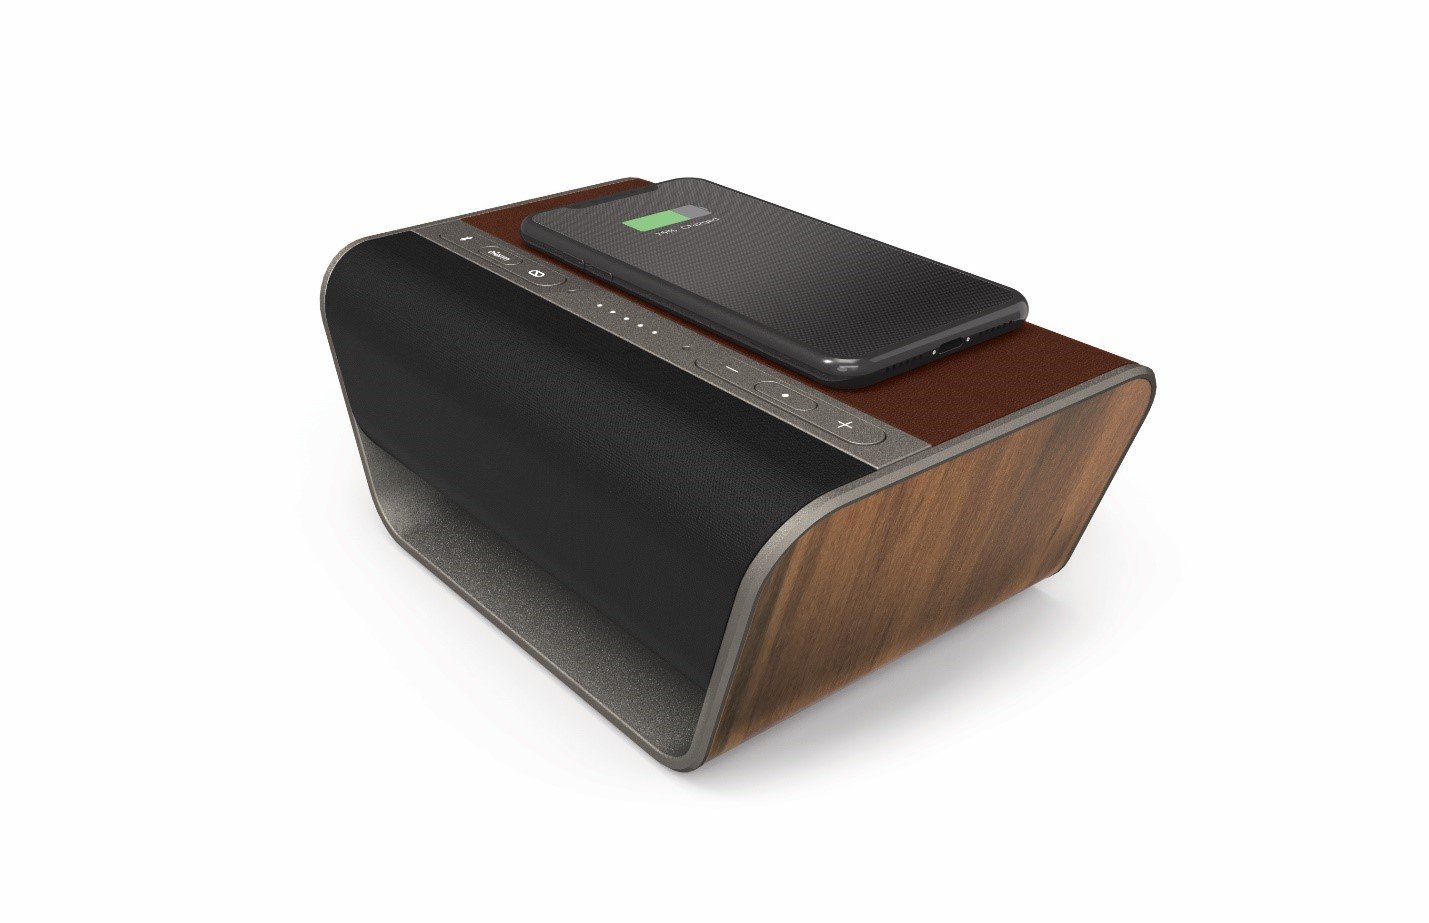 Cavalier Audio Releases a Sound System Complete with Alexa & Wireless Charging